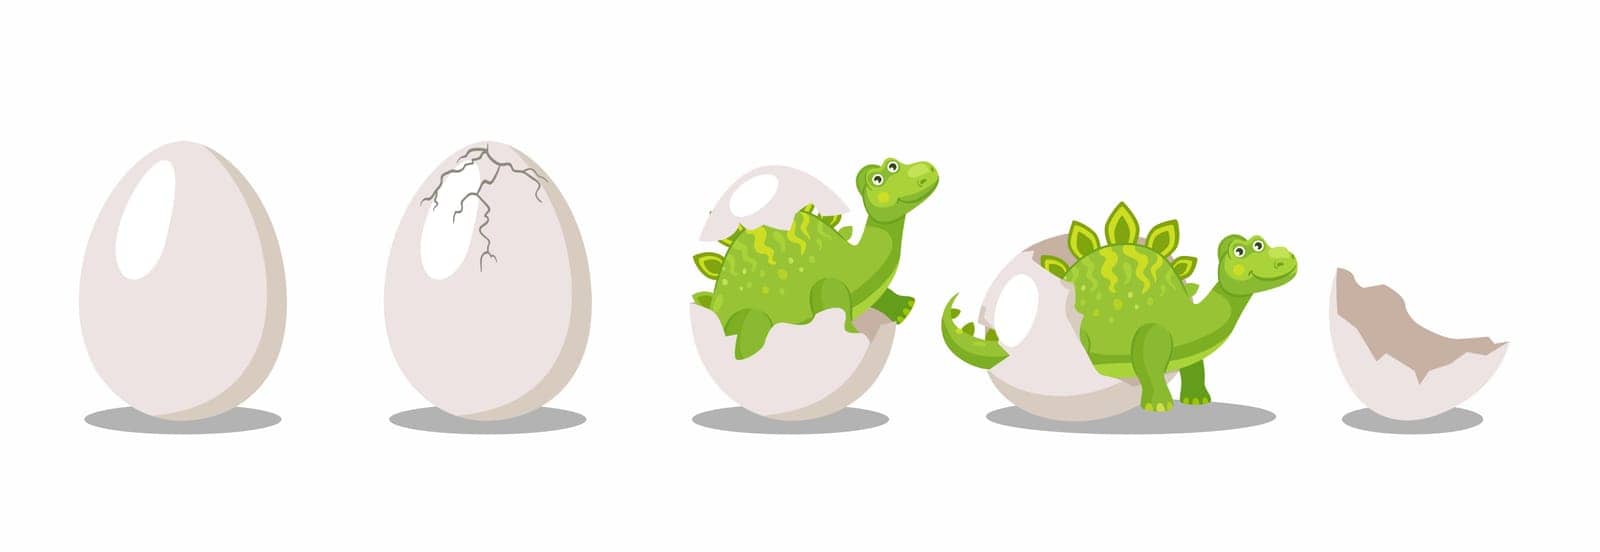 Stages of hatching dinosaur from egg cartoon illustration set. Funny green dino or dragon in egg shell on white background. Birth, extinct reptile, carnivore concept